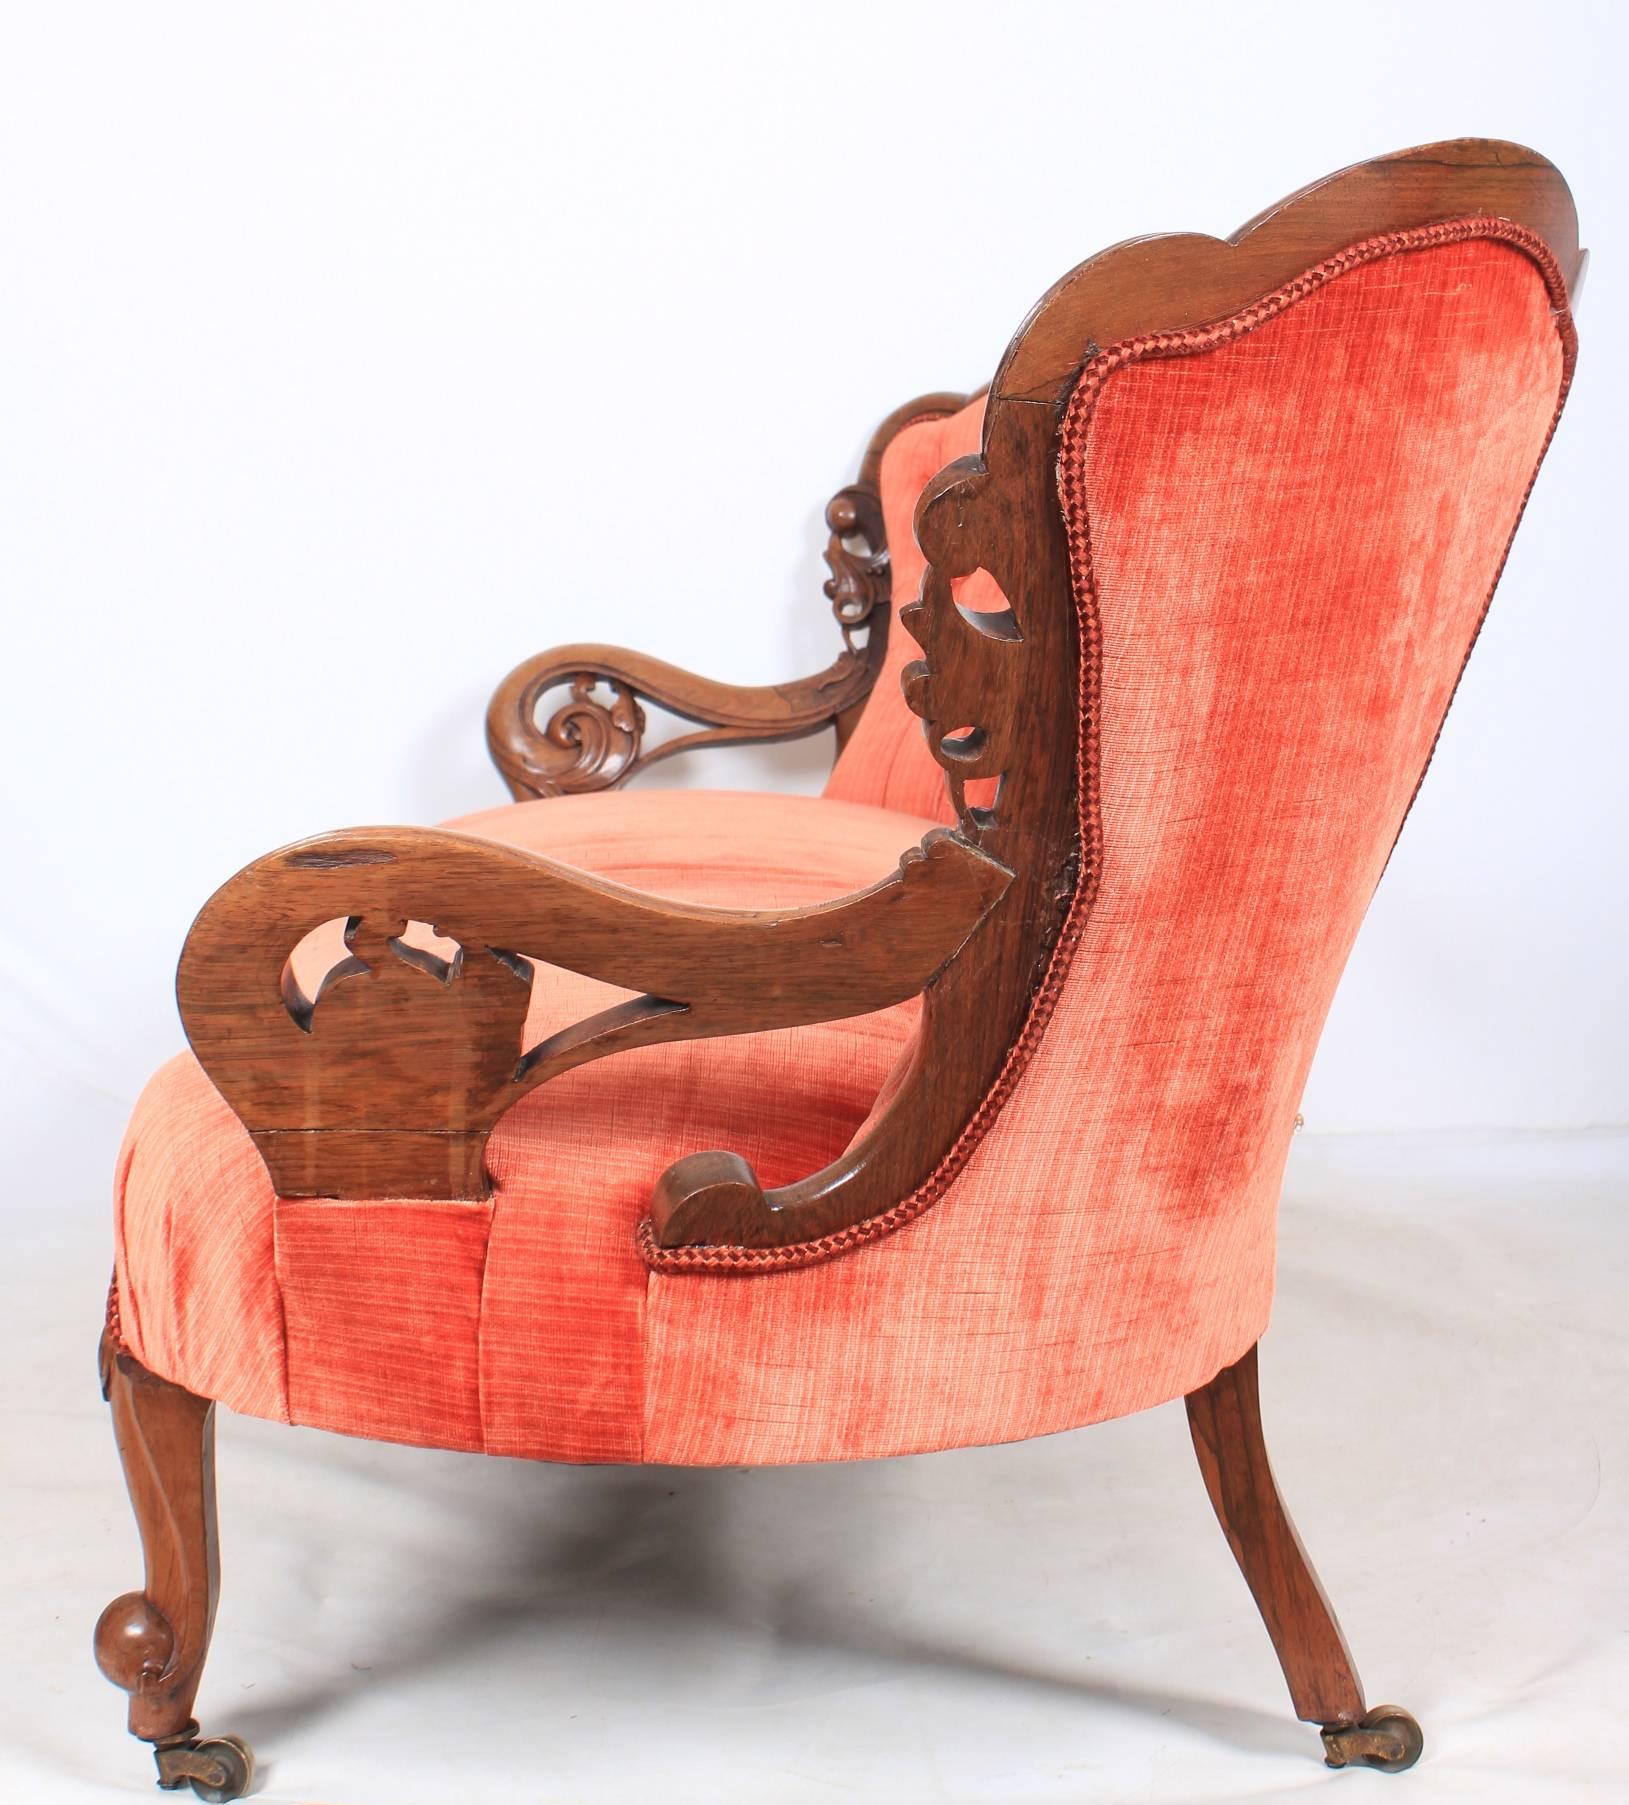 English, circa 1880.
This unusual double spoon back sofa would make a really lovely feature piece.
It has beautiful shaped and carved backs with carved scroll arms.
Upholstered in a deep salmon orange velour fabric.
On carved legs with